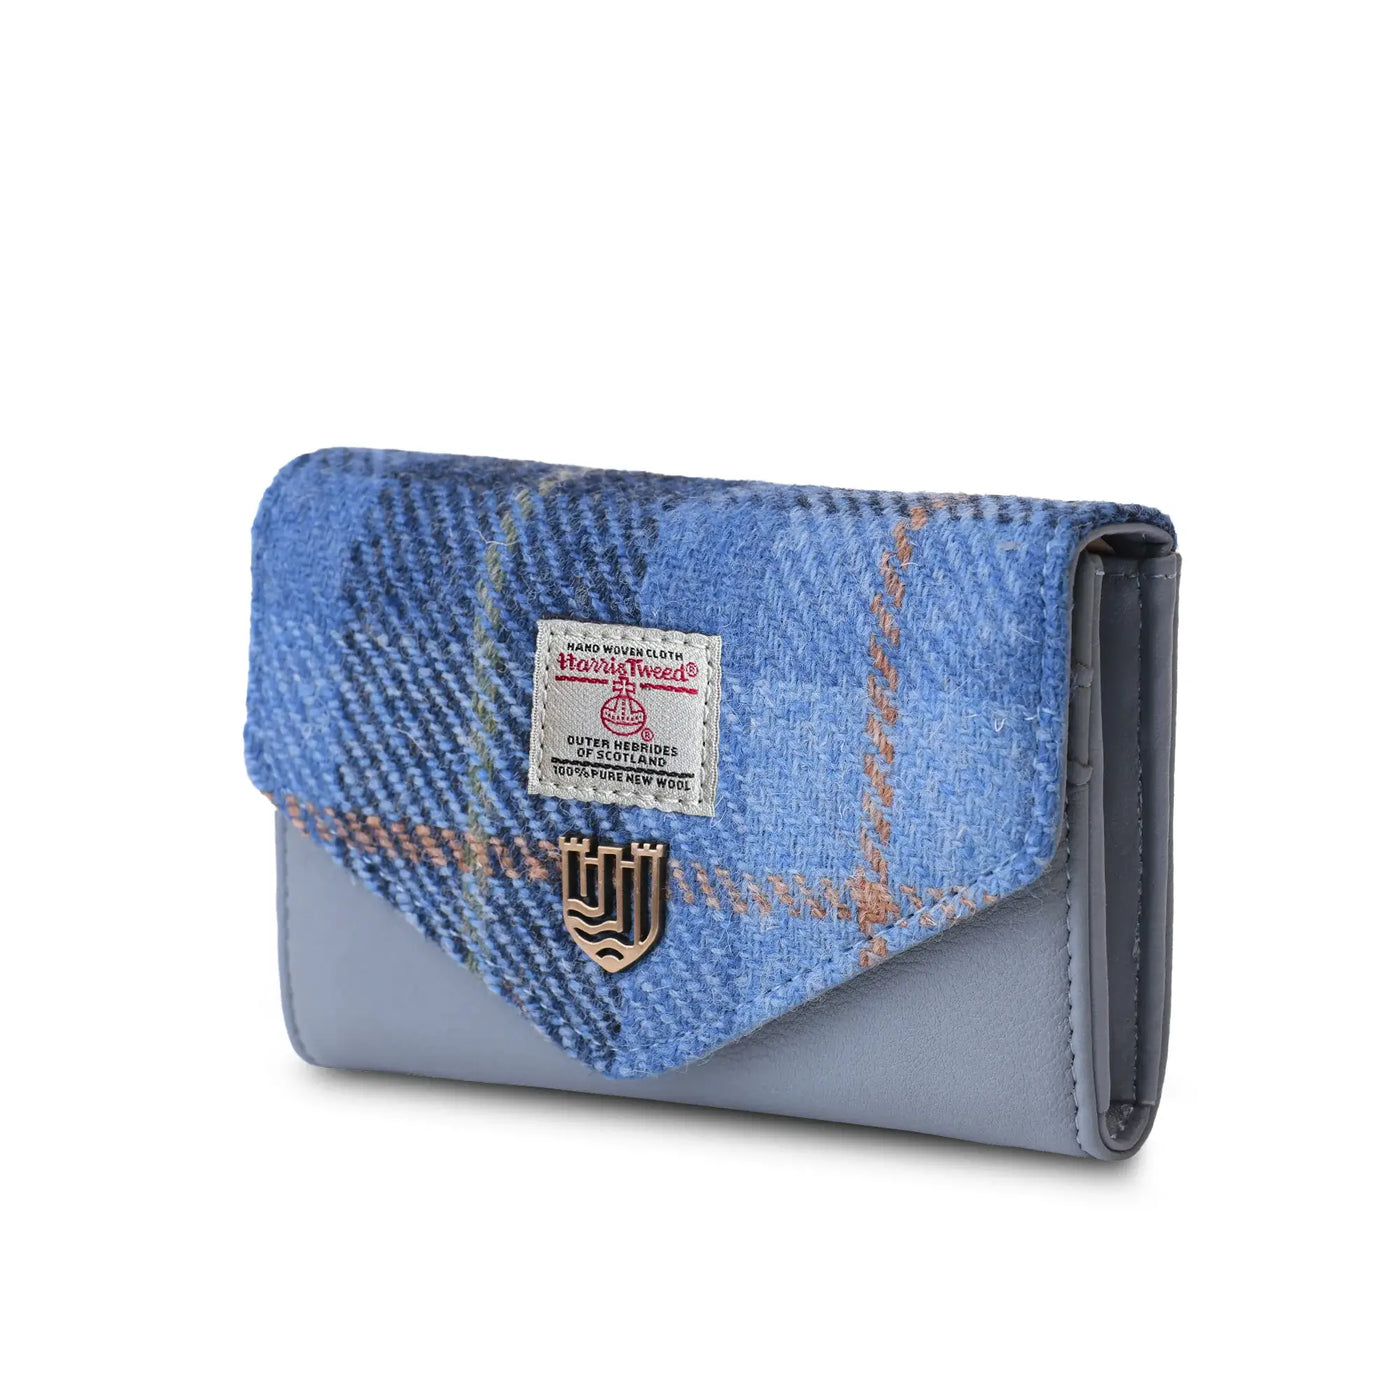 Vintage Canvas Vintage Canvas Messenger Bag With Thick Cloth For Women Small,  Retro, And Cute Crossbody Purse With Zipper Closure Perfect For Evening  Events 231023 From Mu08, $9.68 | DHgate.Com